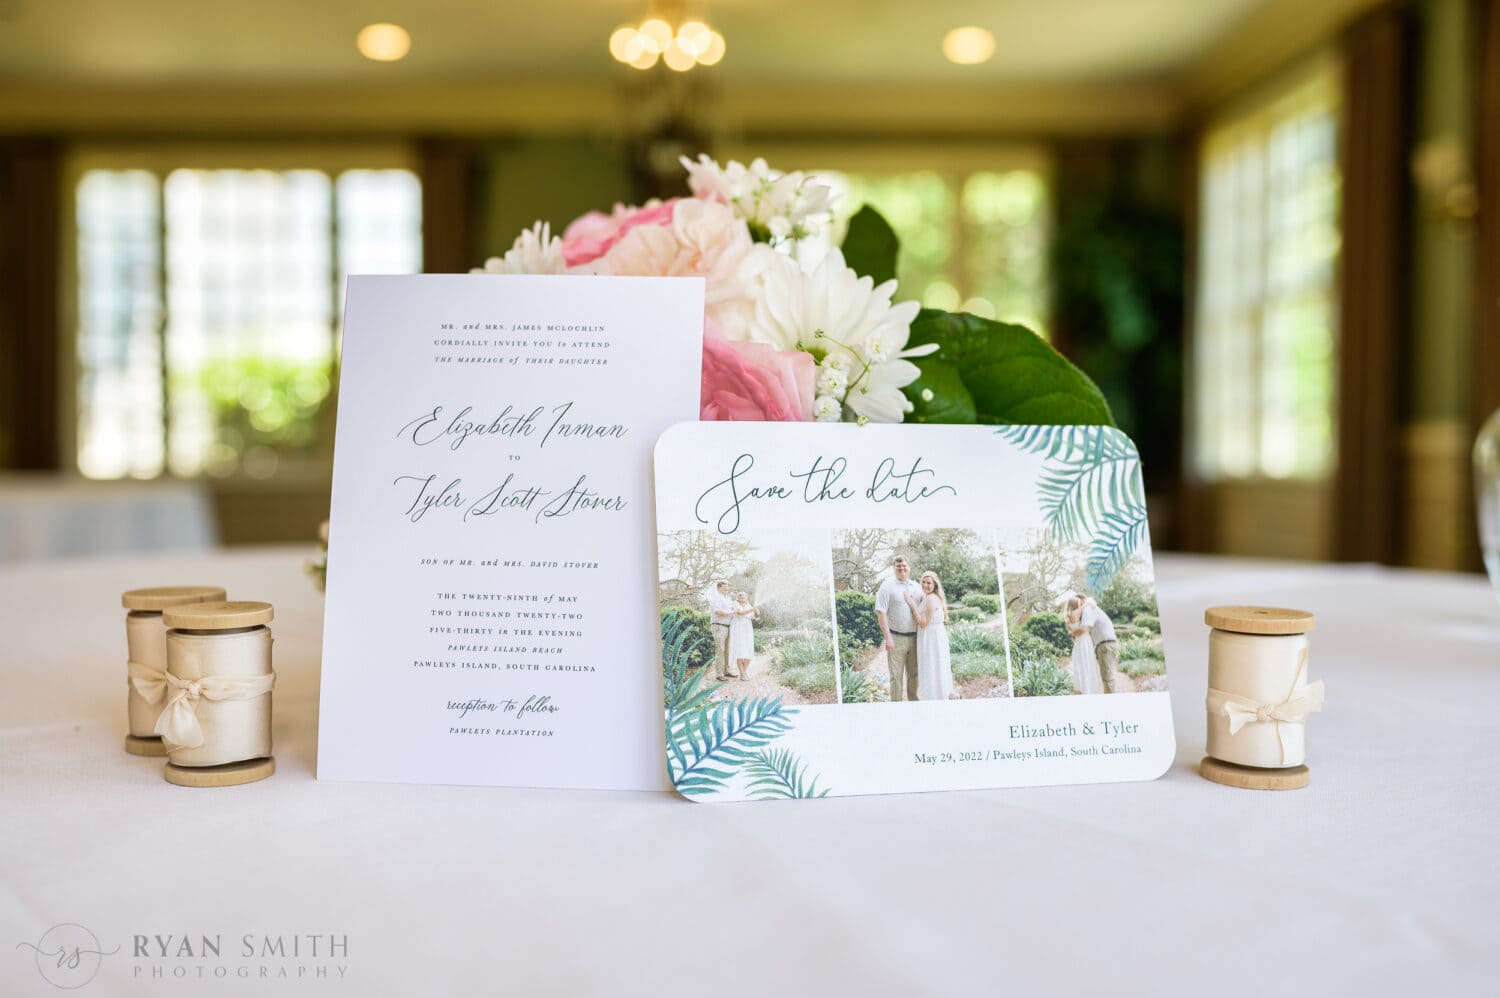 Pictures of wedding details with rings and invitation - Pawleys Plantation